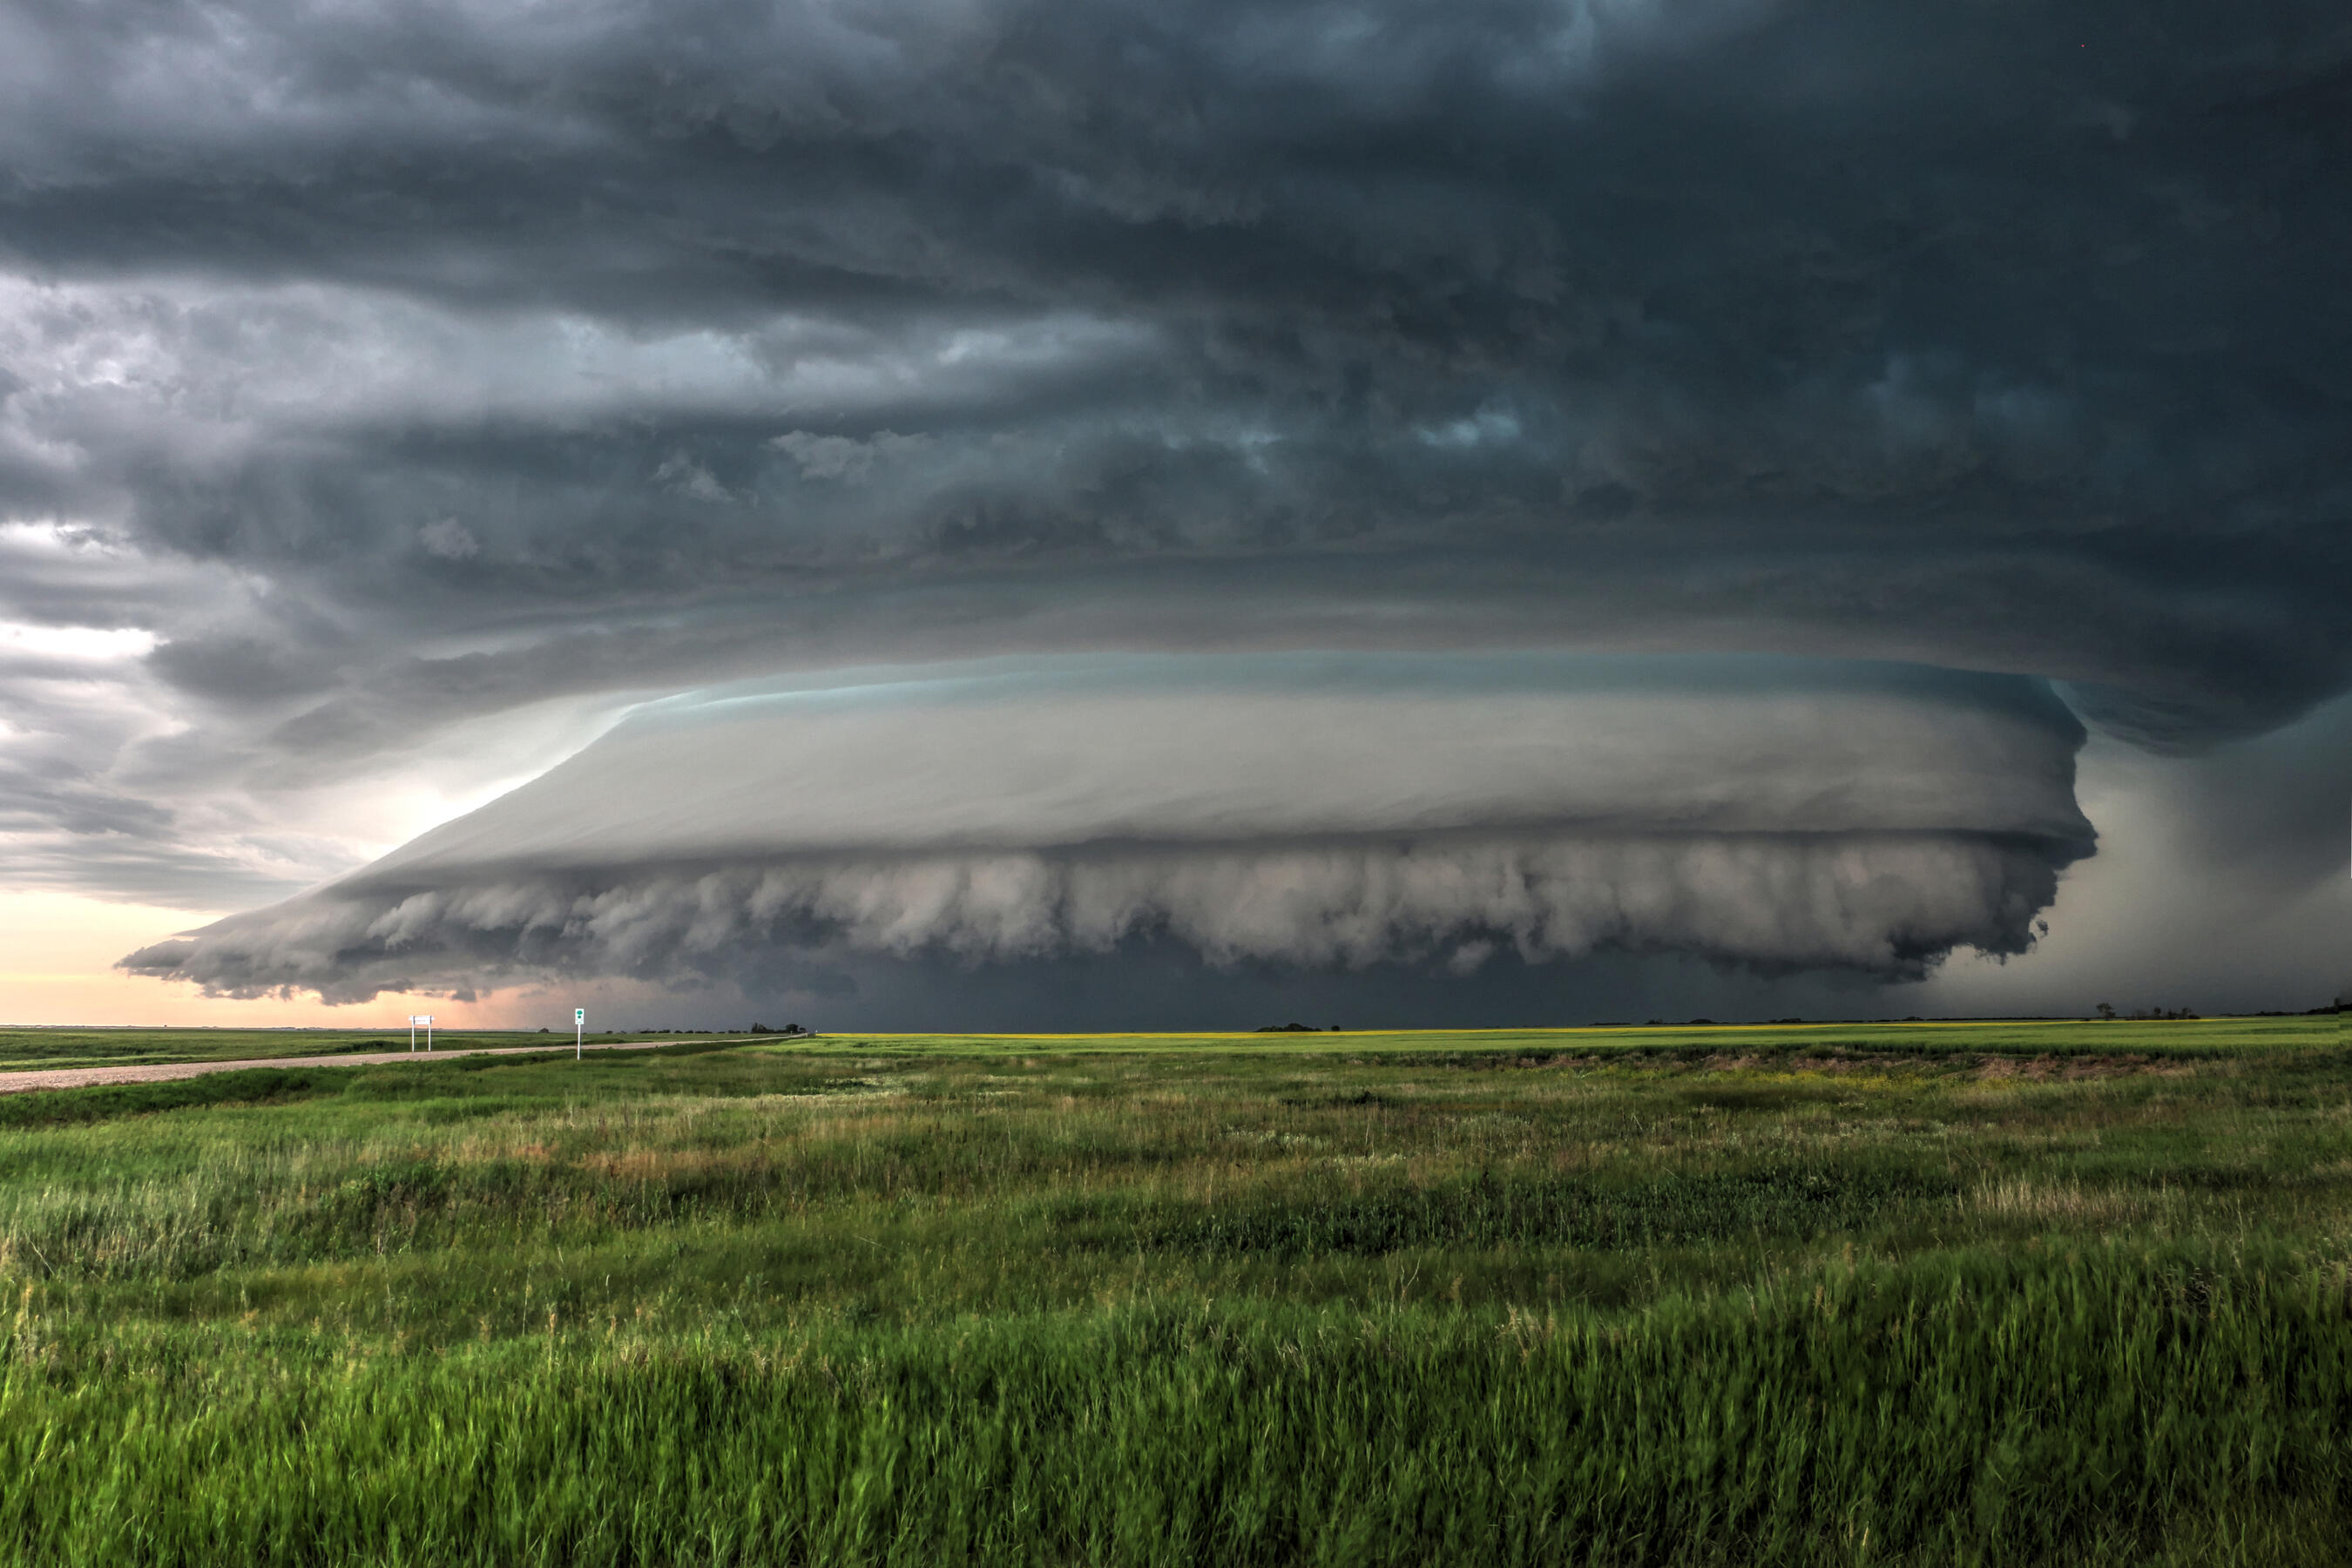 Perfect storm by Craig Boehm